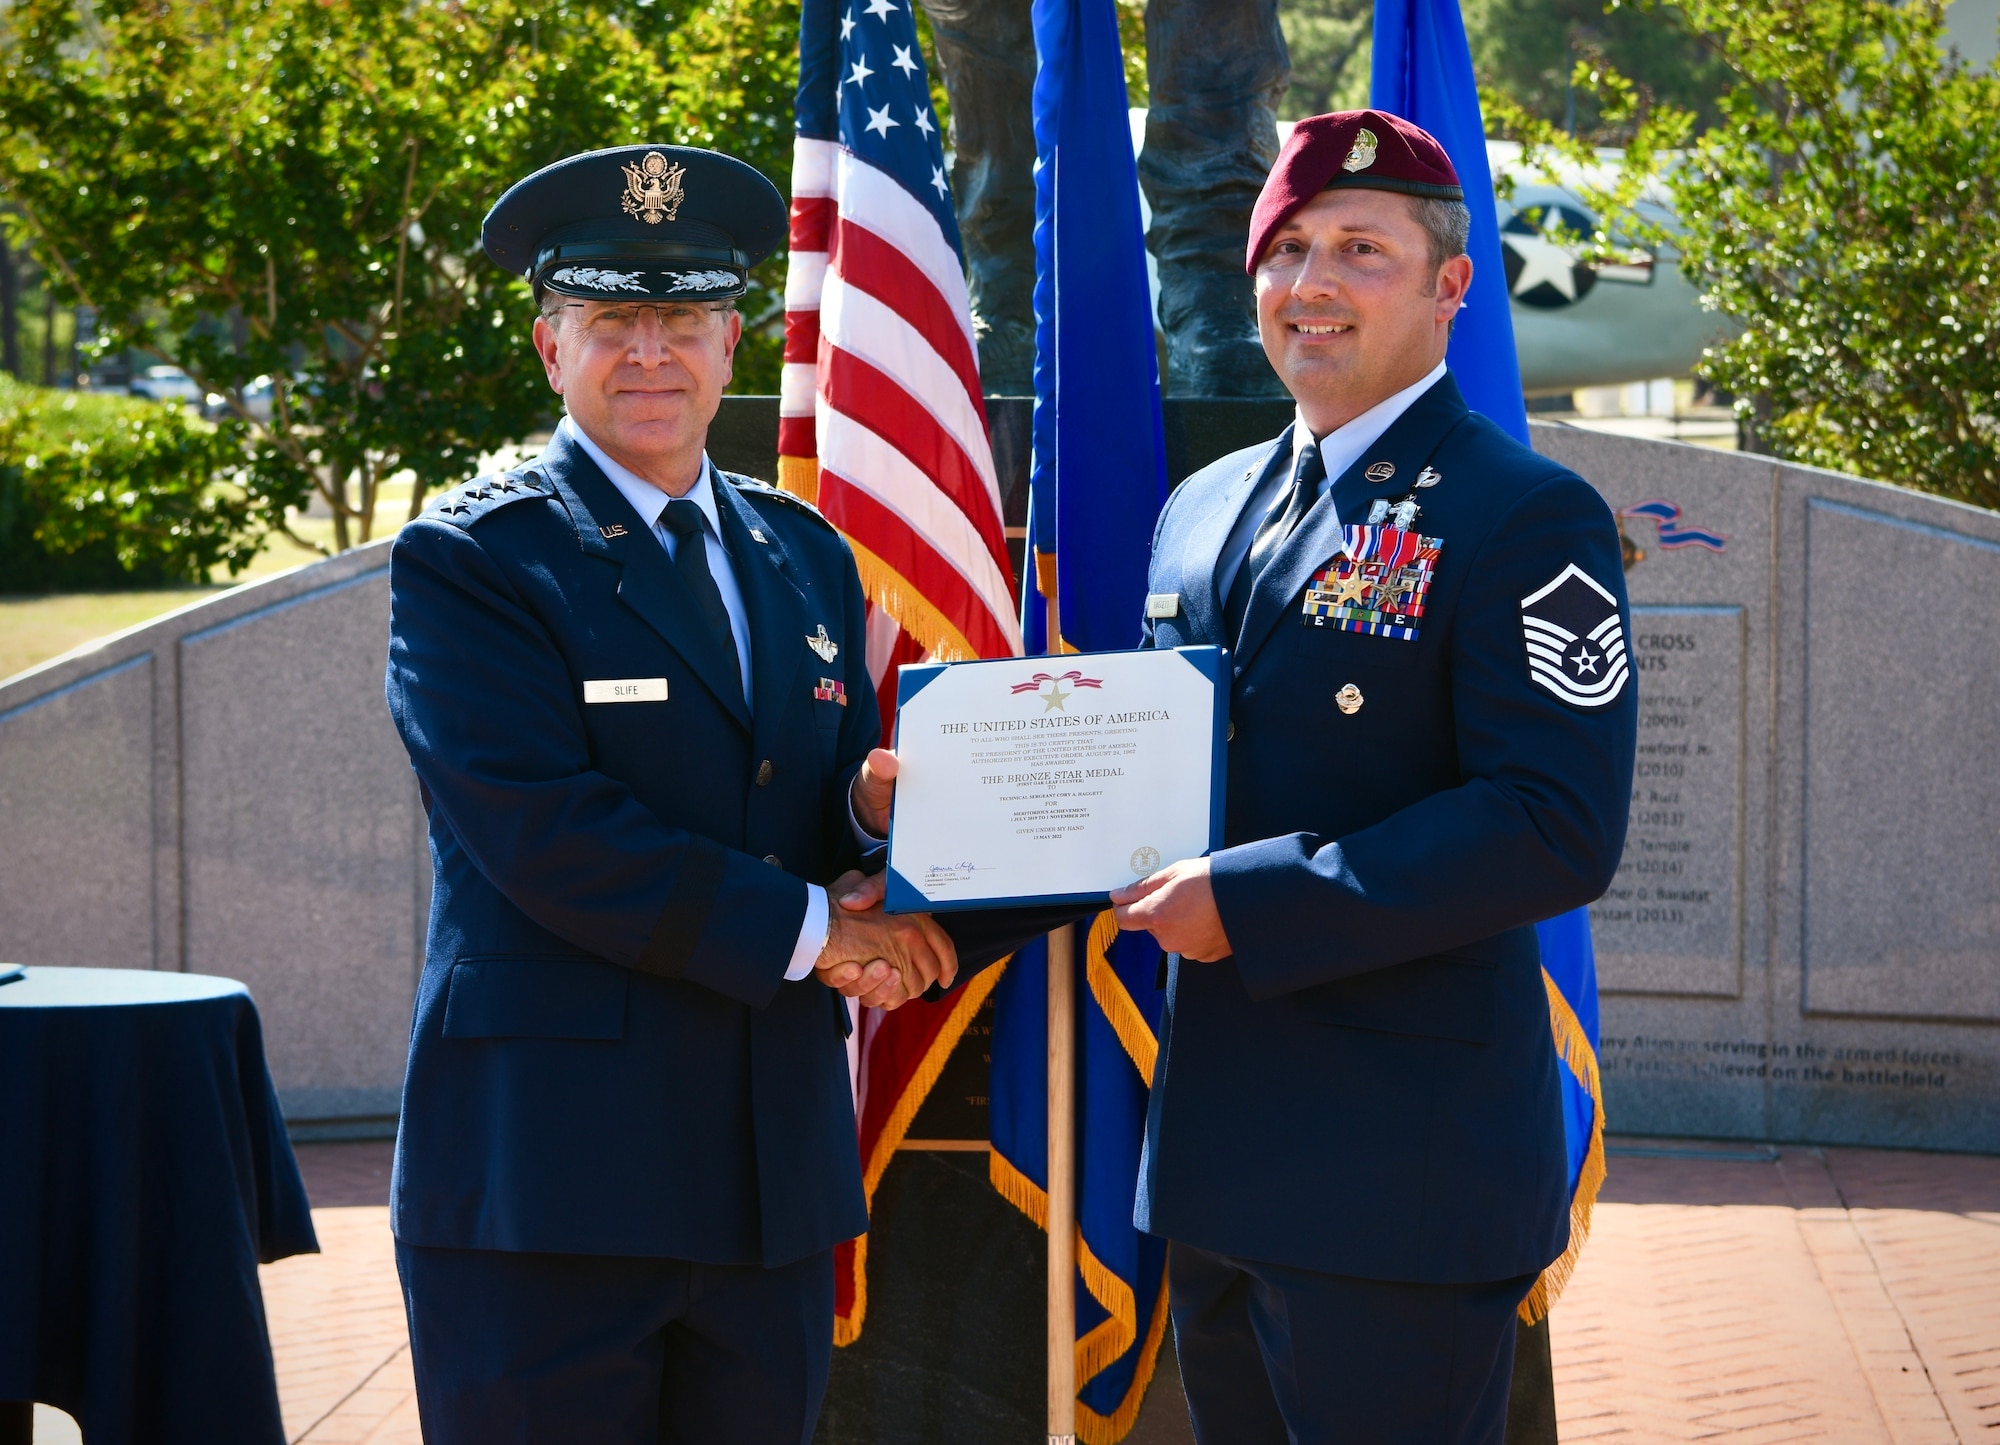 U.S. Air Force Lt. Gen. Jim Slife, commander of Air Force Special Operations Command, presents the Bronze Star Medal to Master Sgt. Cory Haggett, a special tactics operator with the 23d Special Tactics Squadron, 24th Special Operations Wing, during a ceremony May 13, 2022, at Hurlburt Field, Fla.  Haggett was also presented the Silver Star during the ceremony.